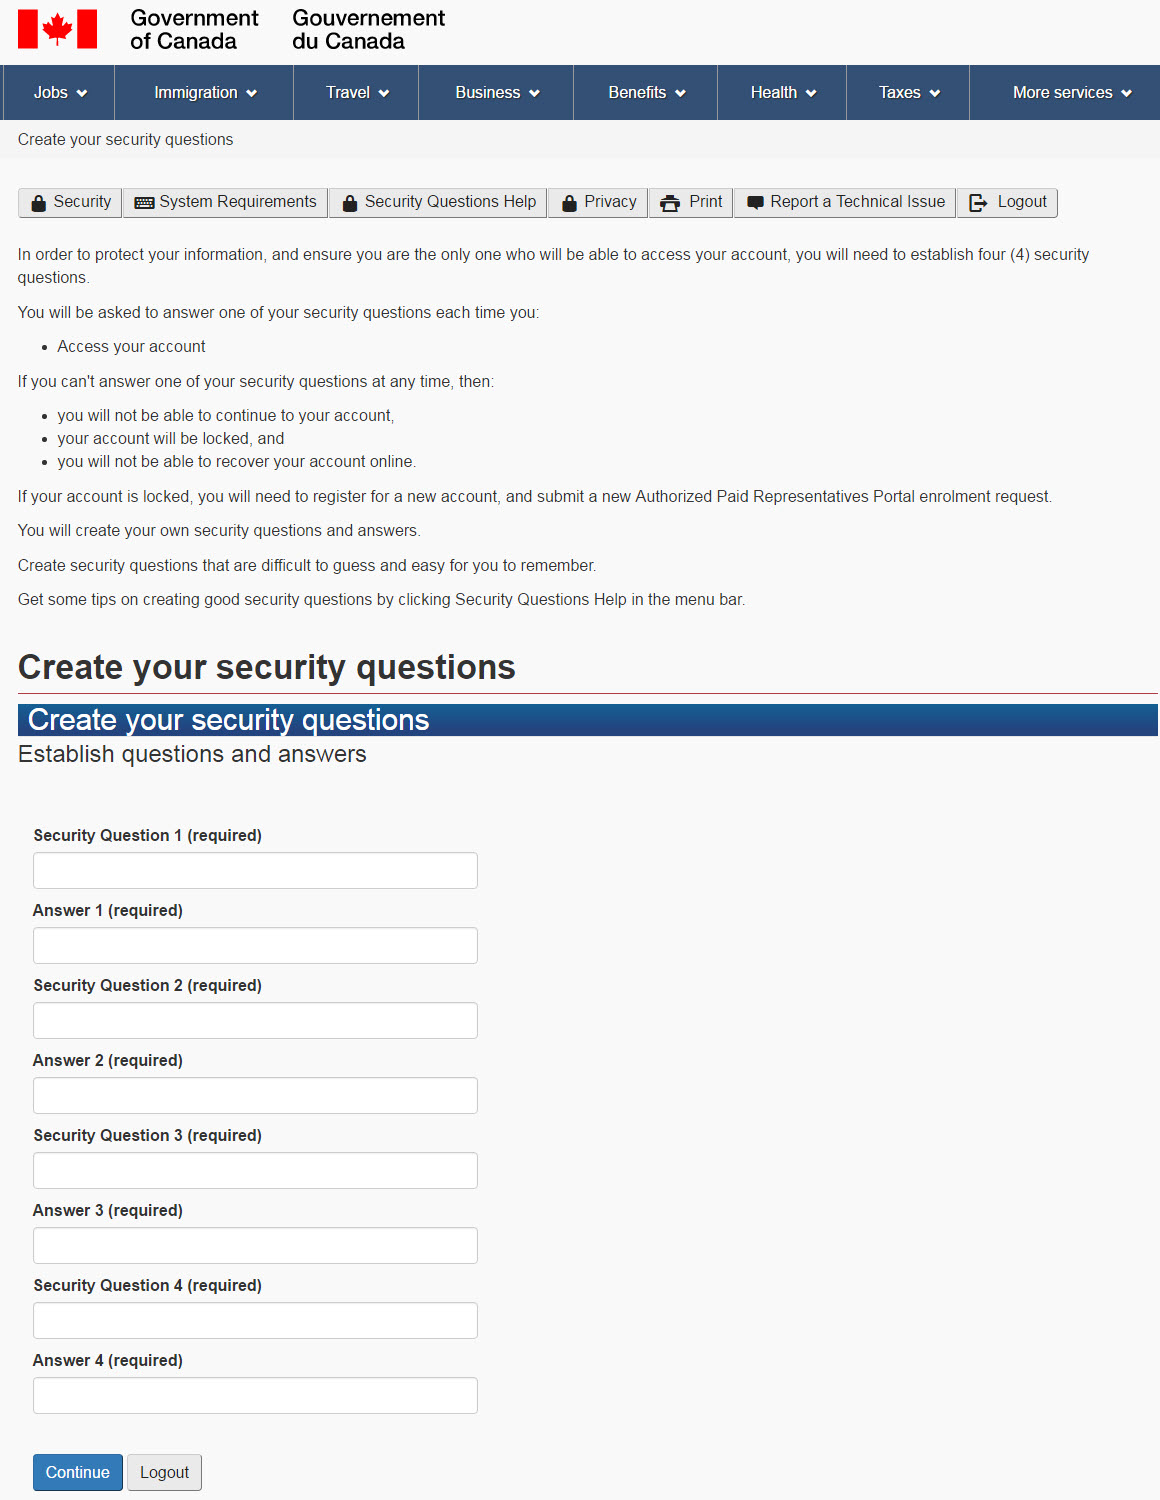 Create your security questions page.